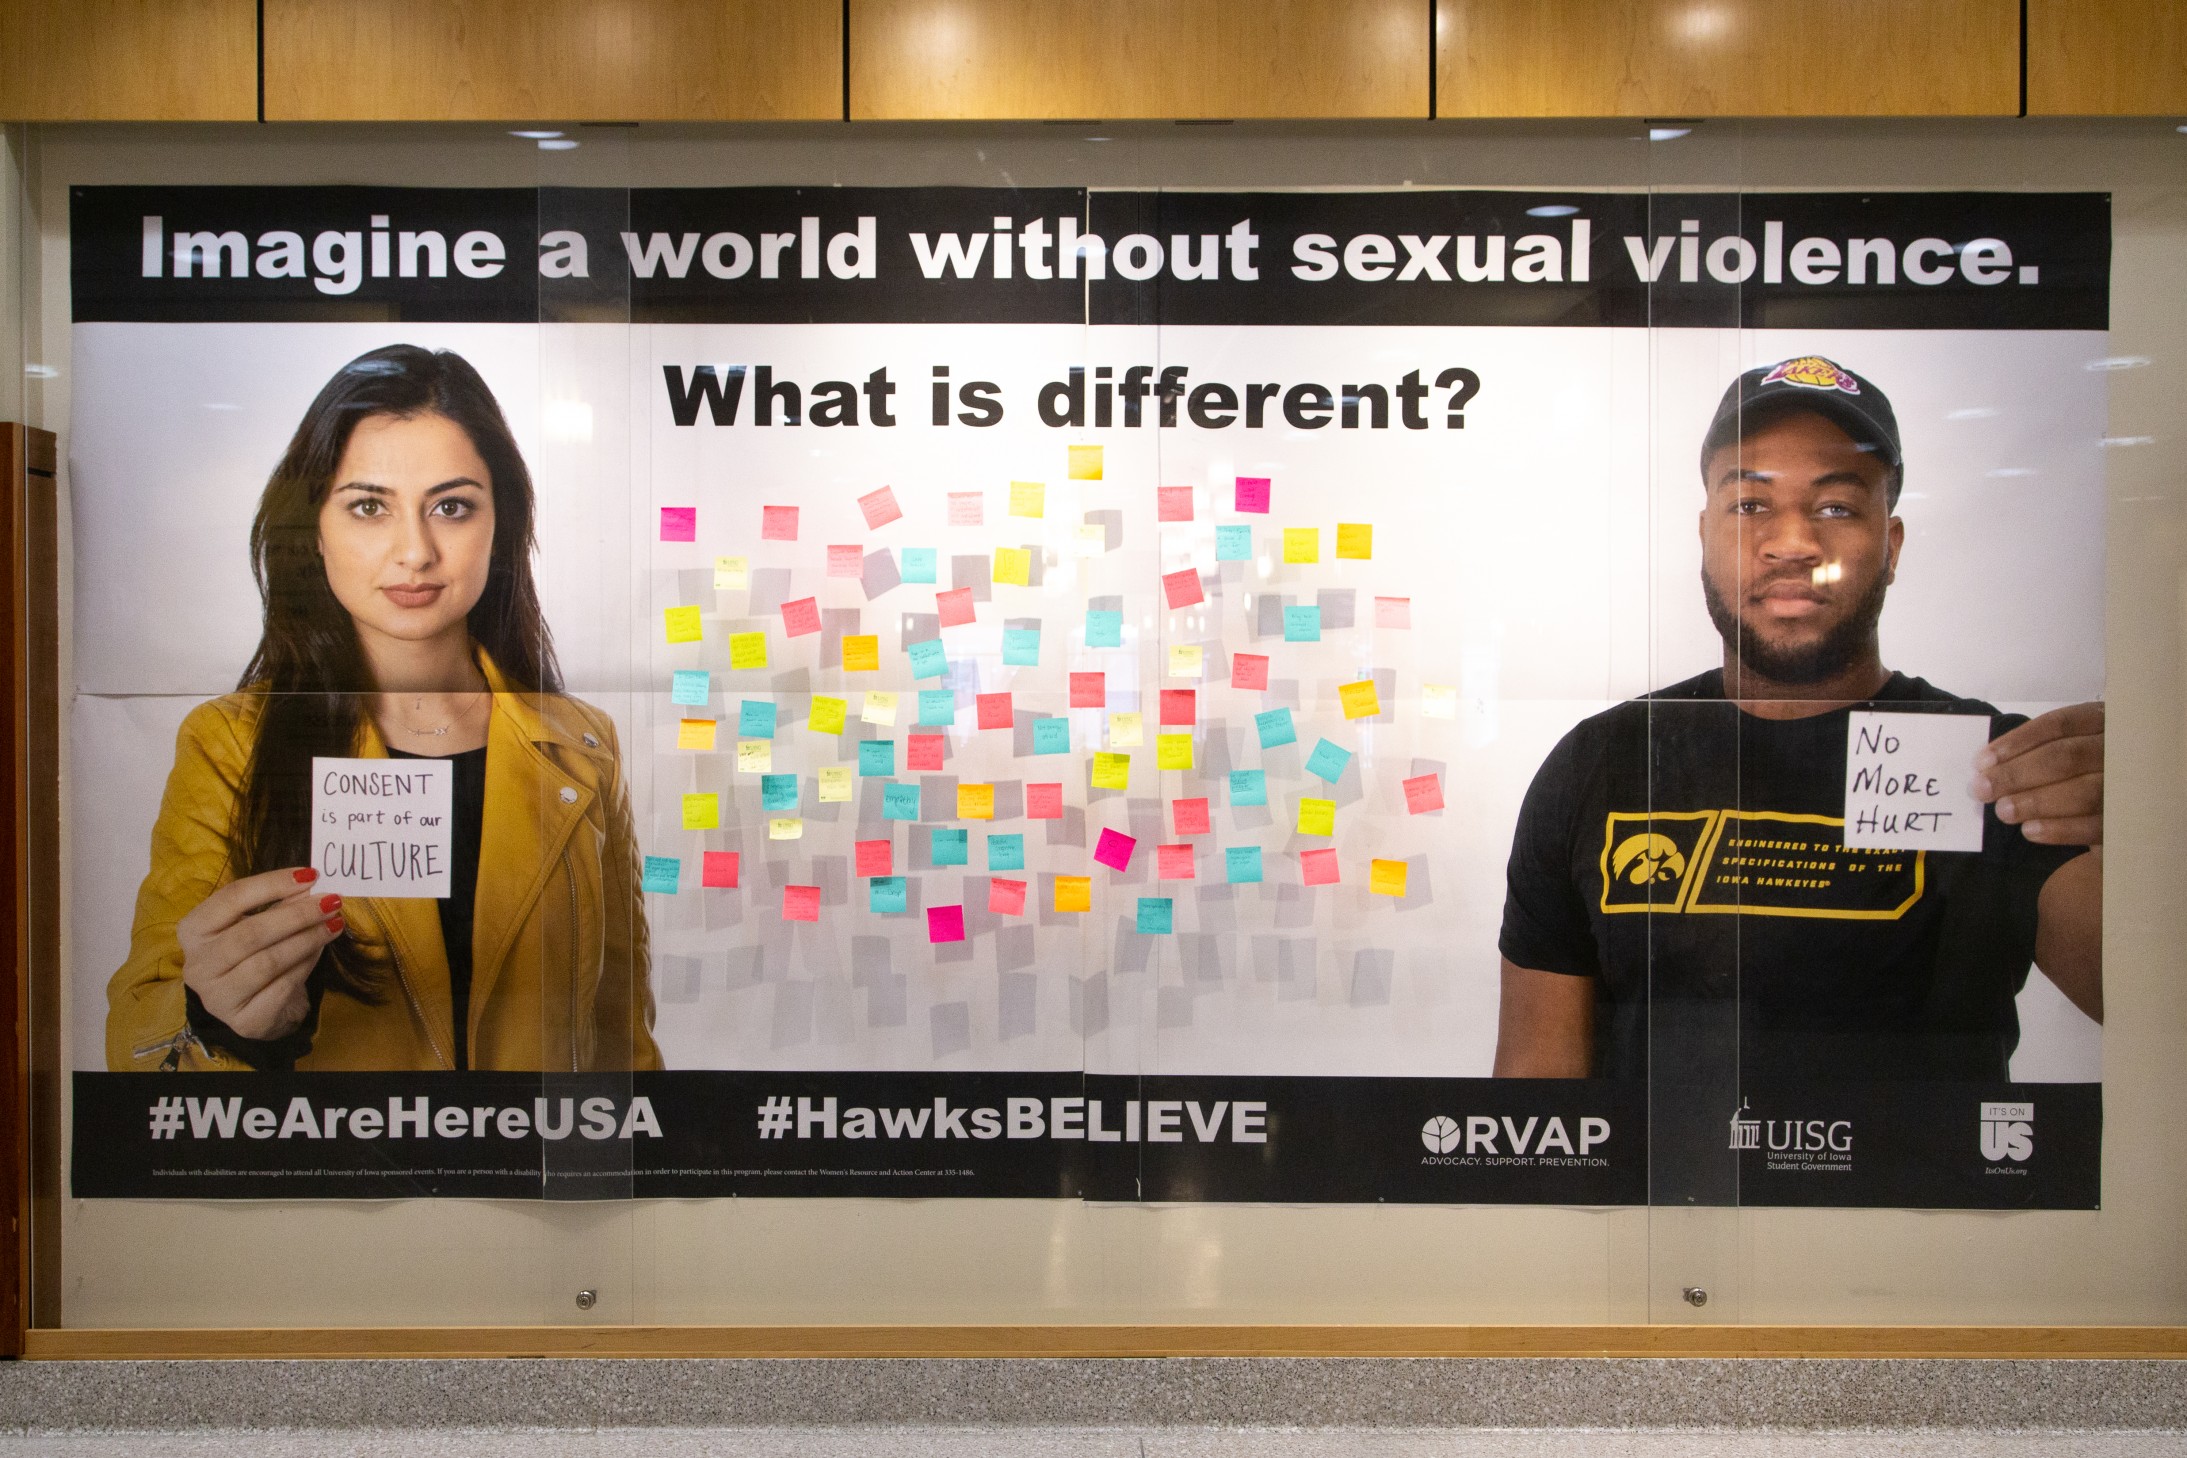 Large poster in the IMU containing the text "Imagine a world without sexual violence."